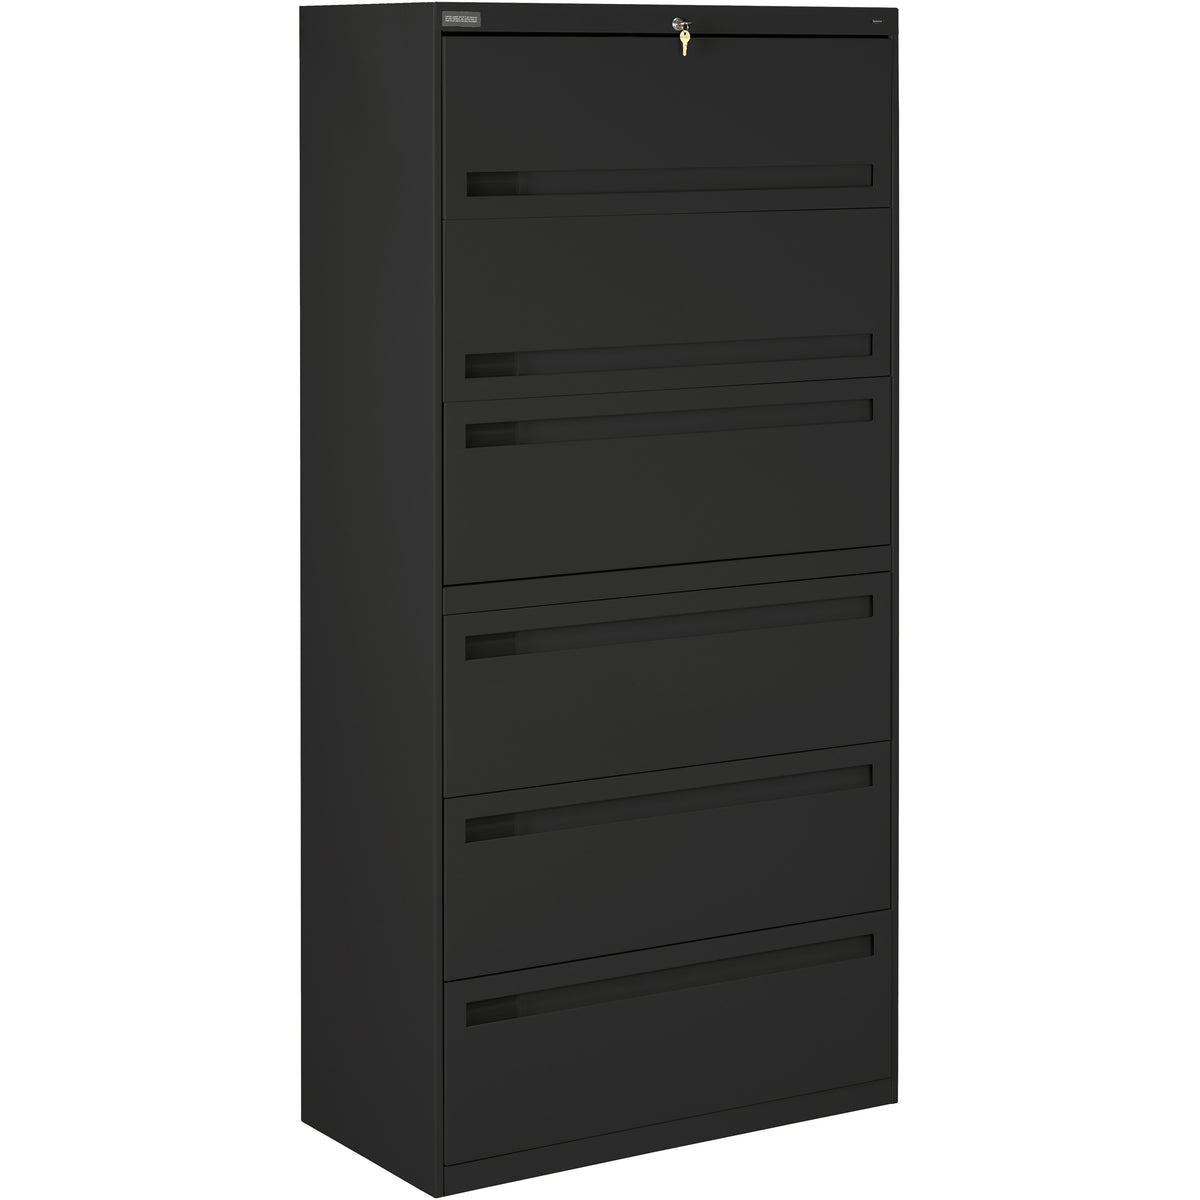 Tennsco 36" Wide Six-Drawer Lateral File with Retractable Doors and Fixed Drawer Fronts, LPL3672L60